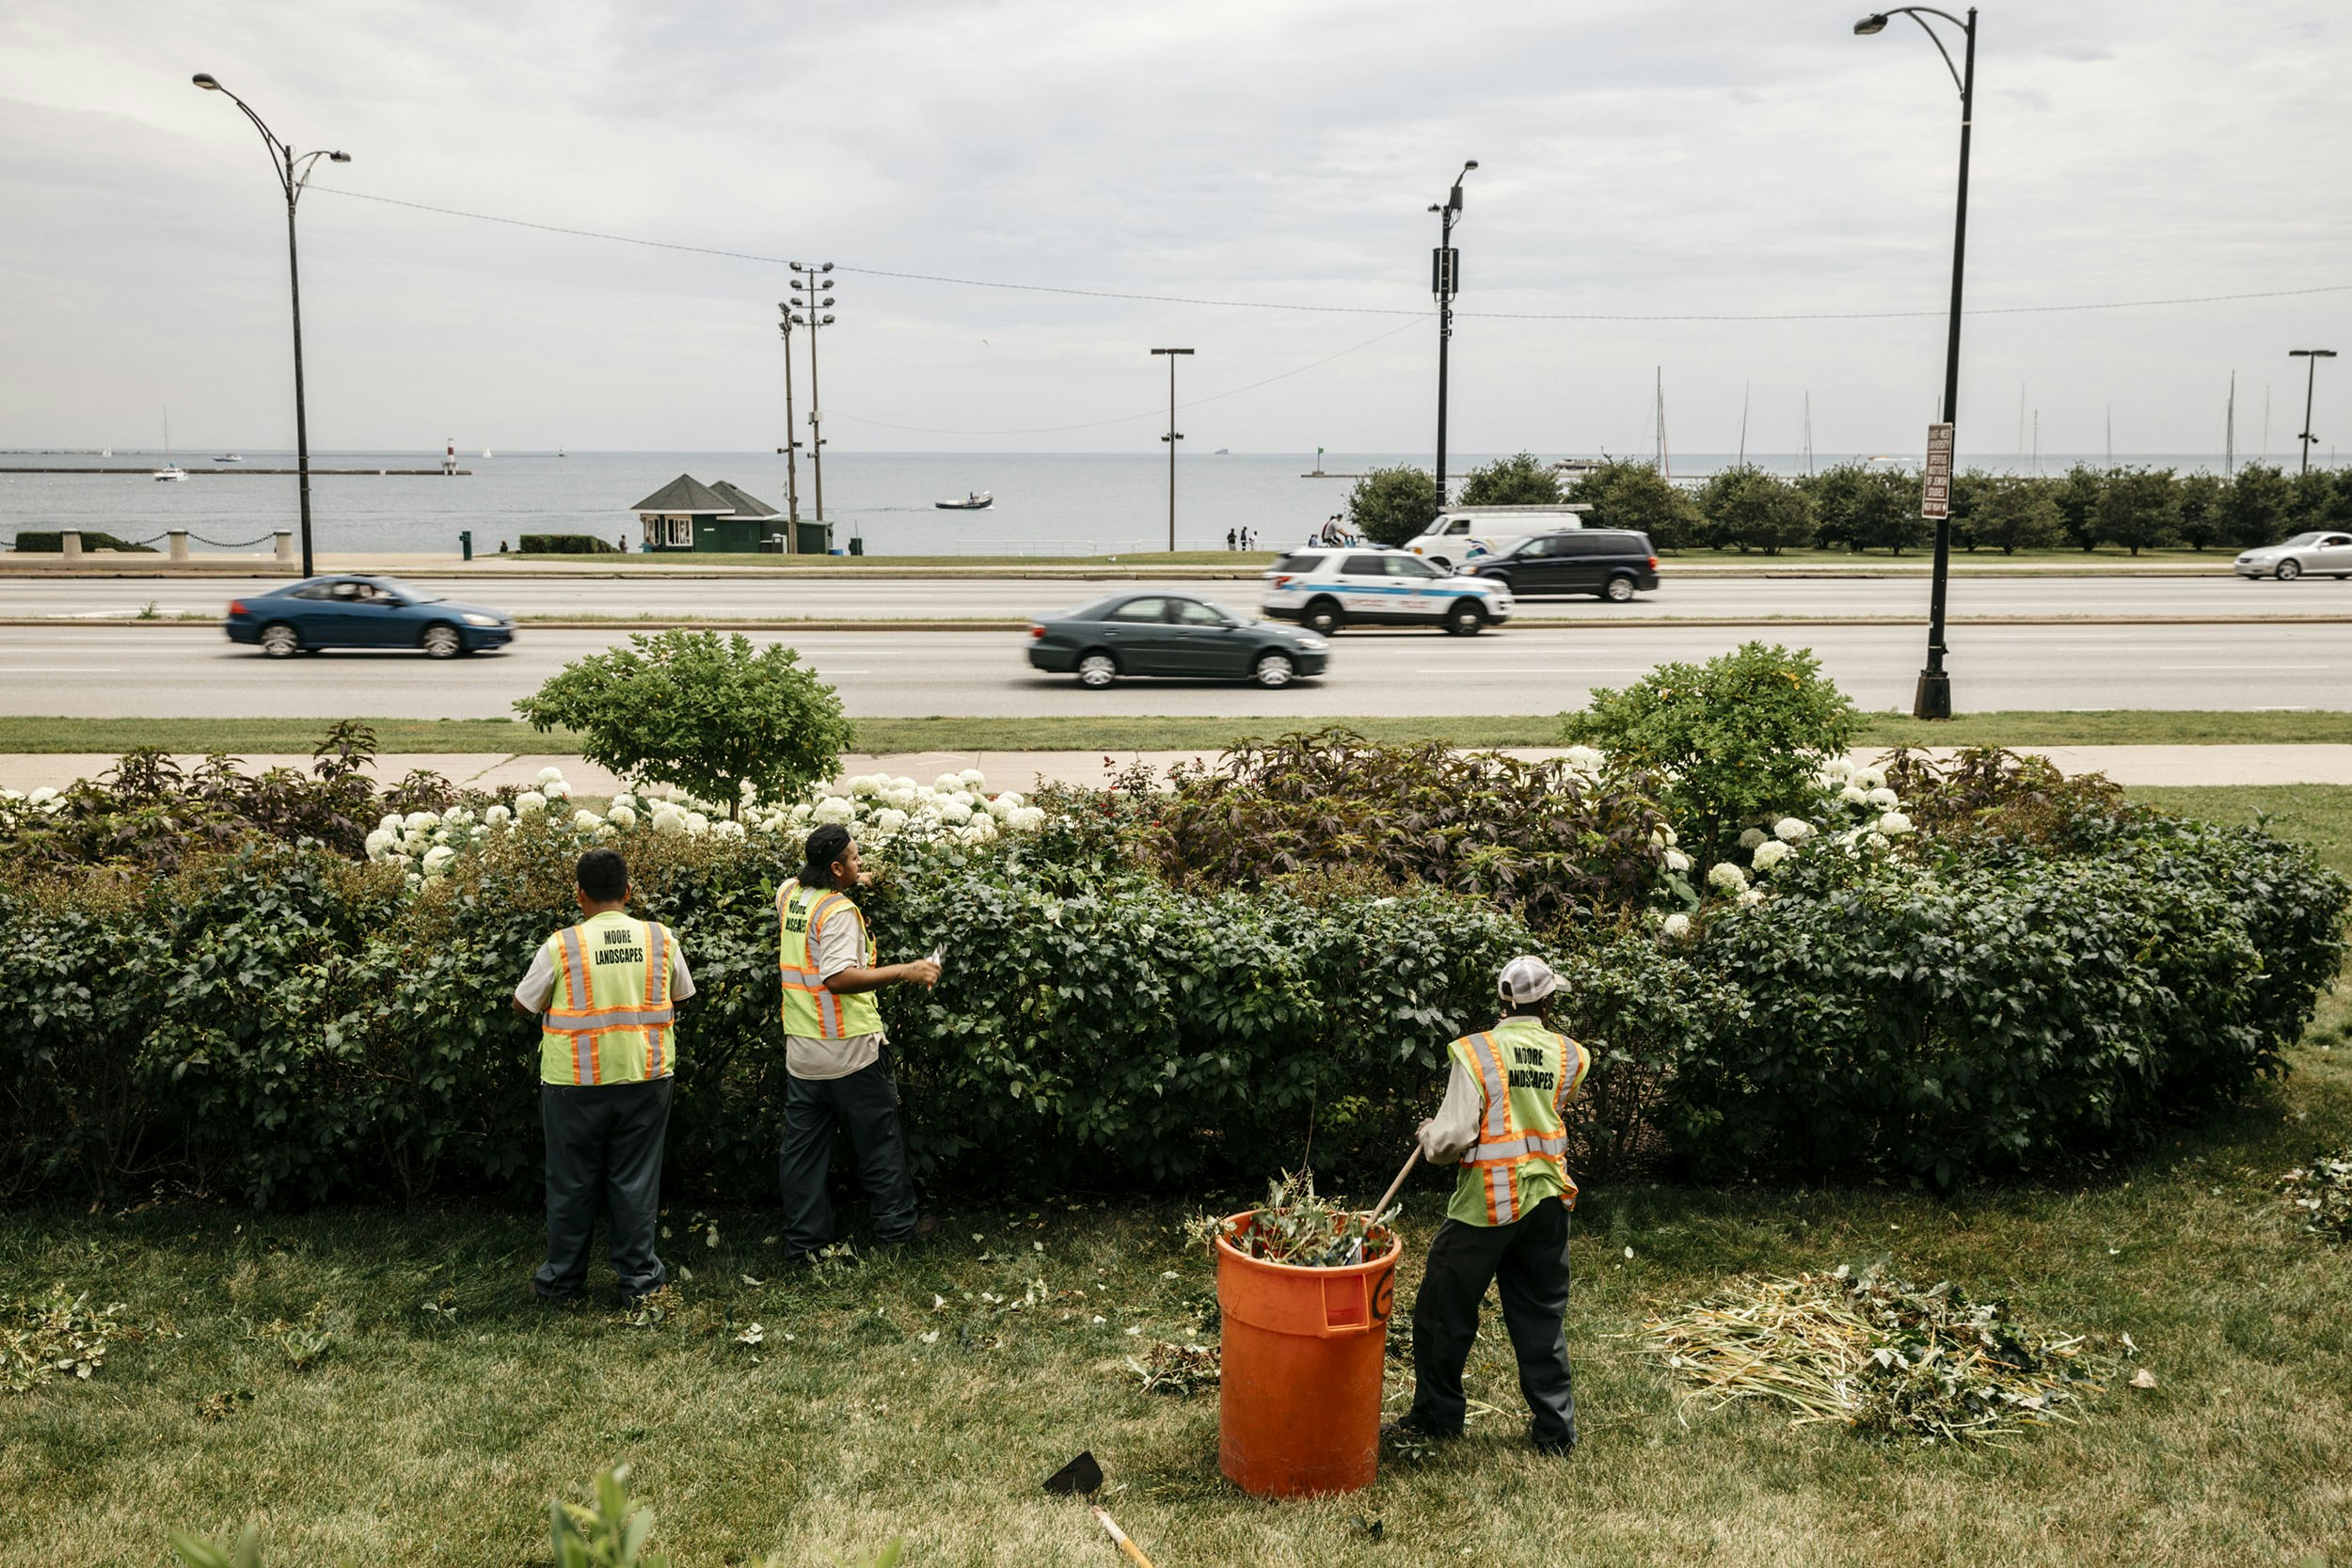 Chicago, IL - July 13, 2017 - Landscapers work across Lake Shore Drive from "Queens Landing", the location where Jedediah Brown parked his car near the shore of Lake Michigan and the incident with the Chicago Police Department's SWAT team ensued.